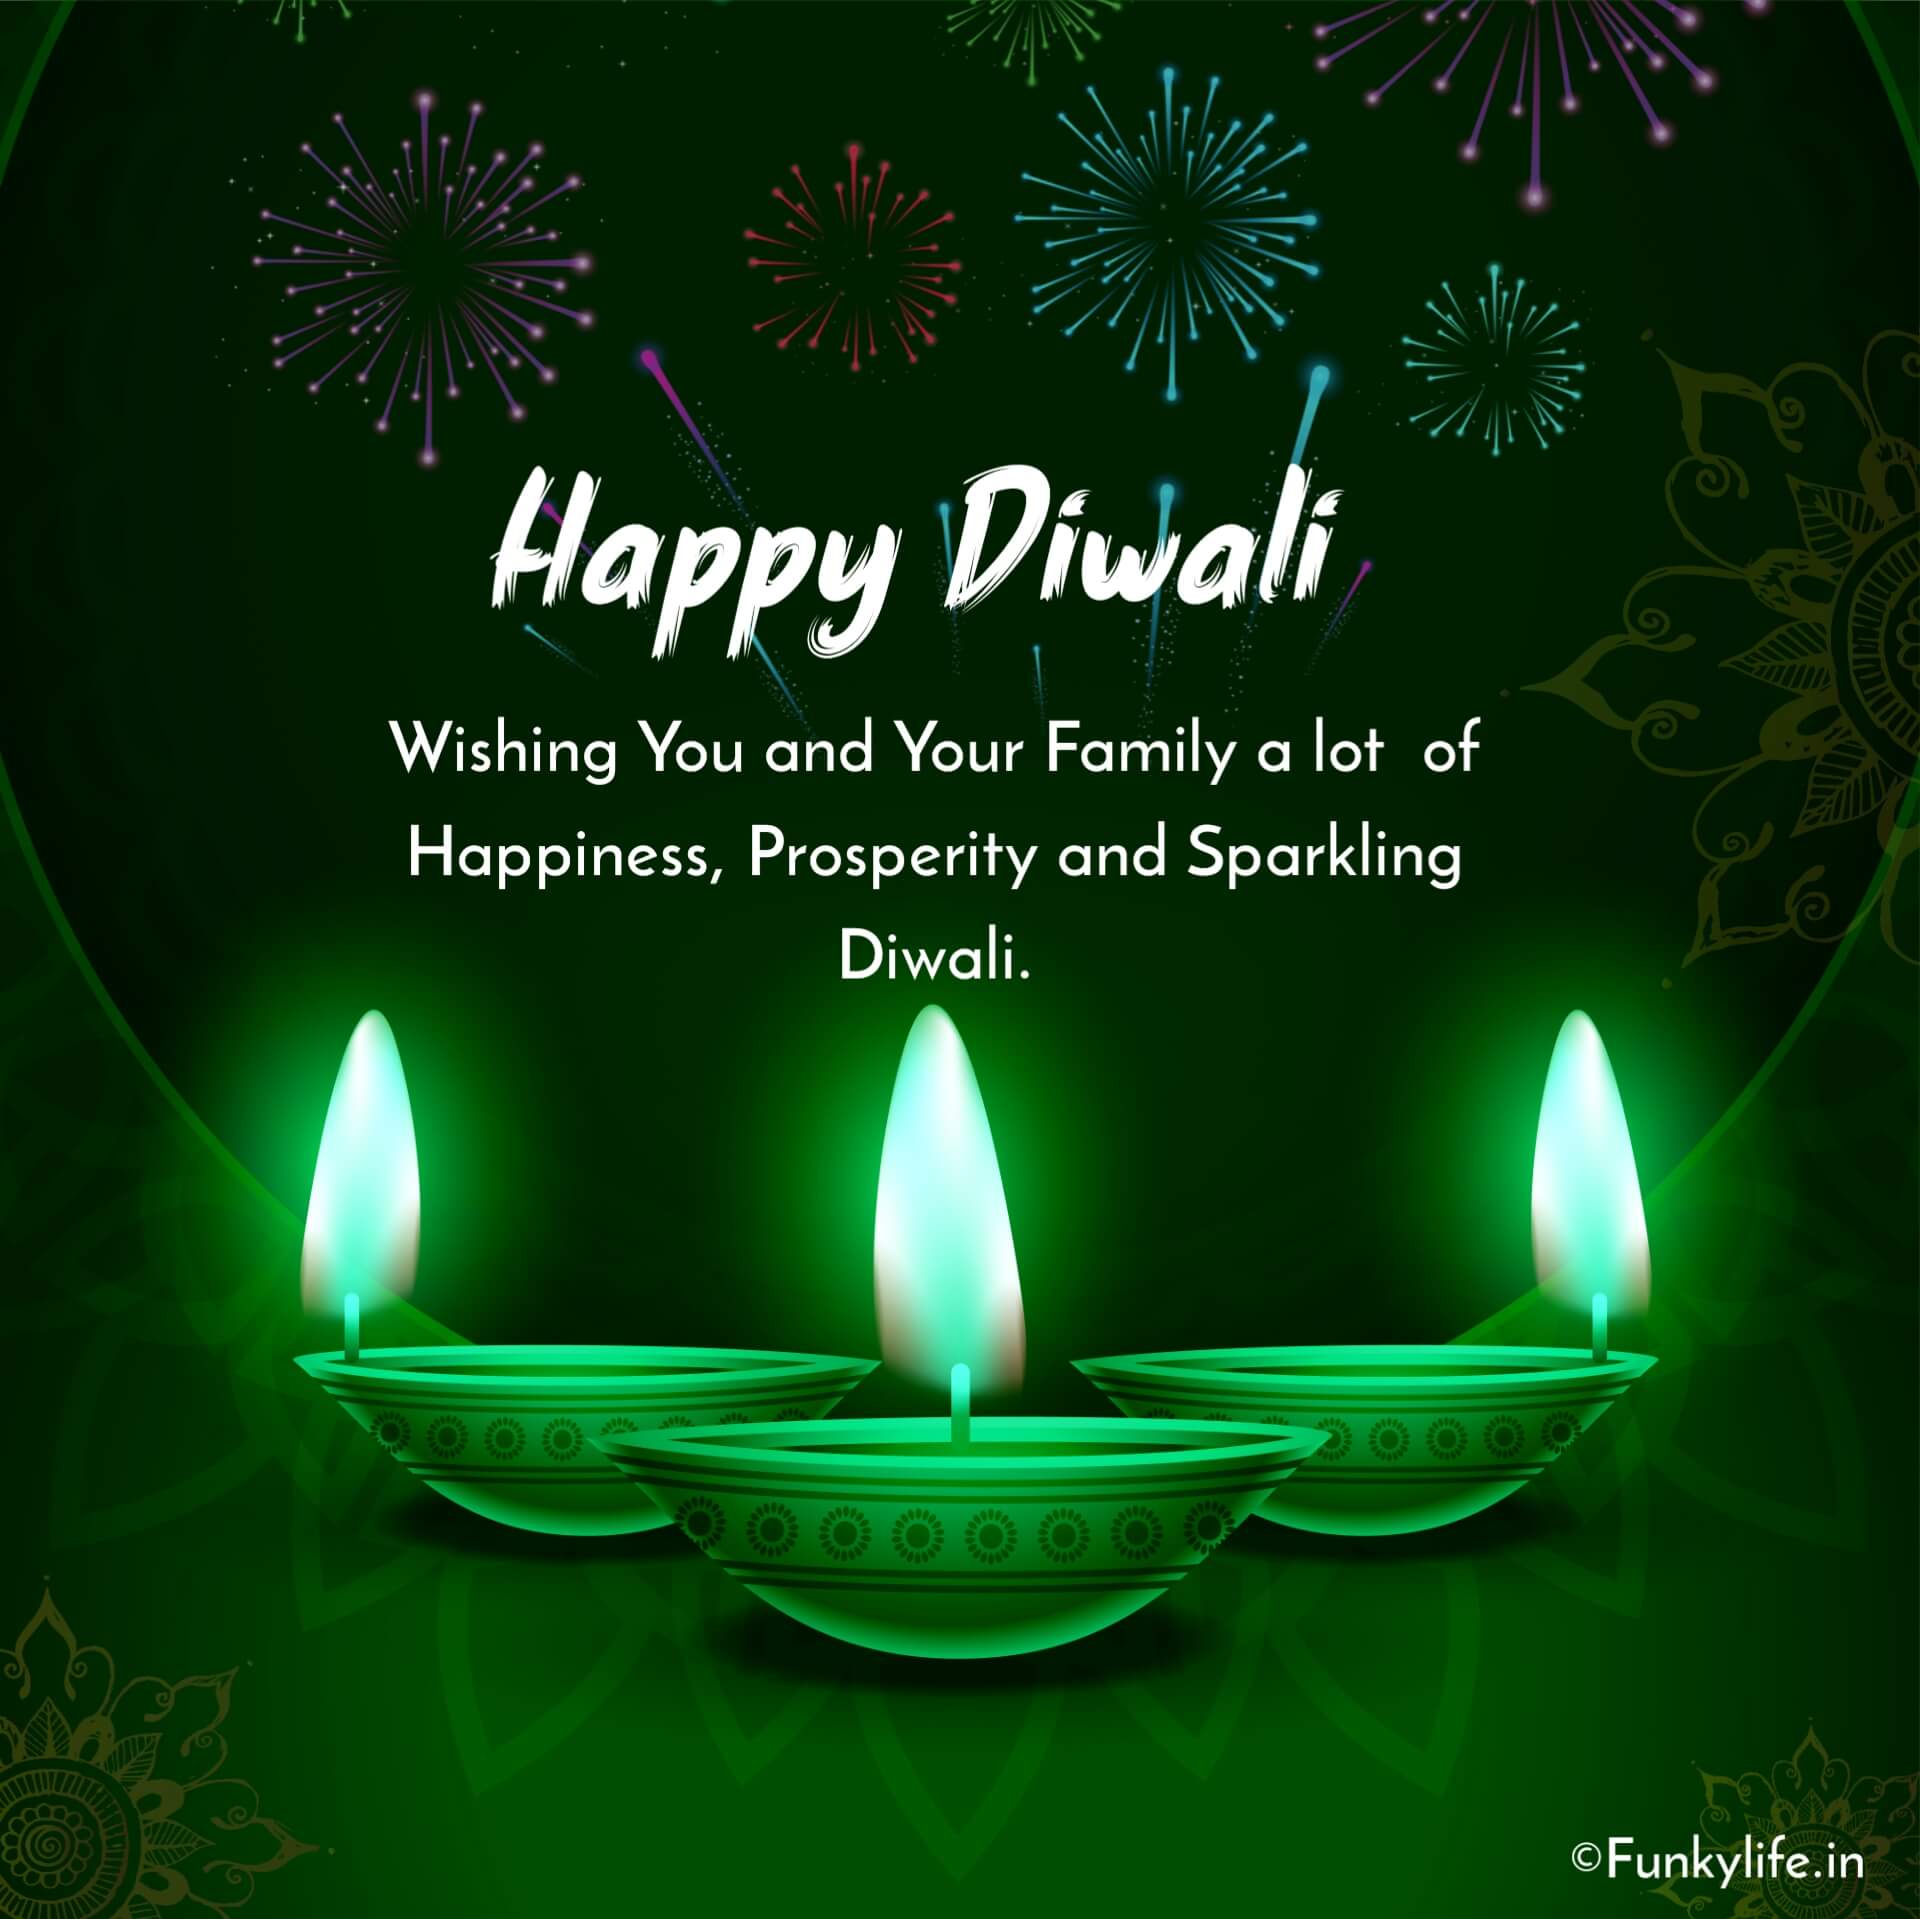 Diwali Images for WhatsApp